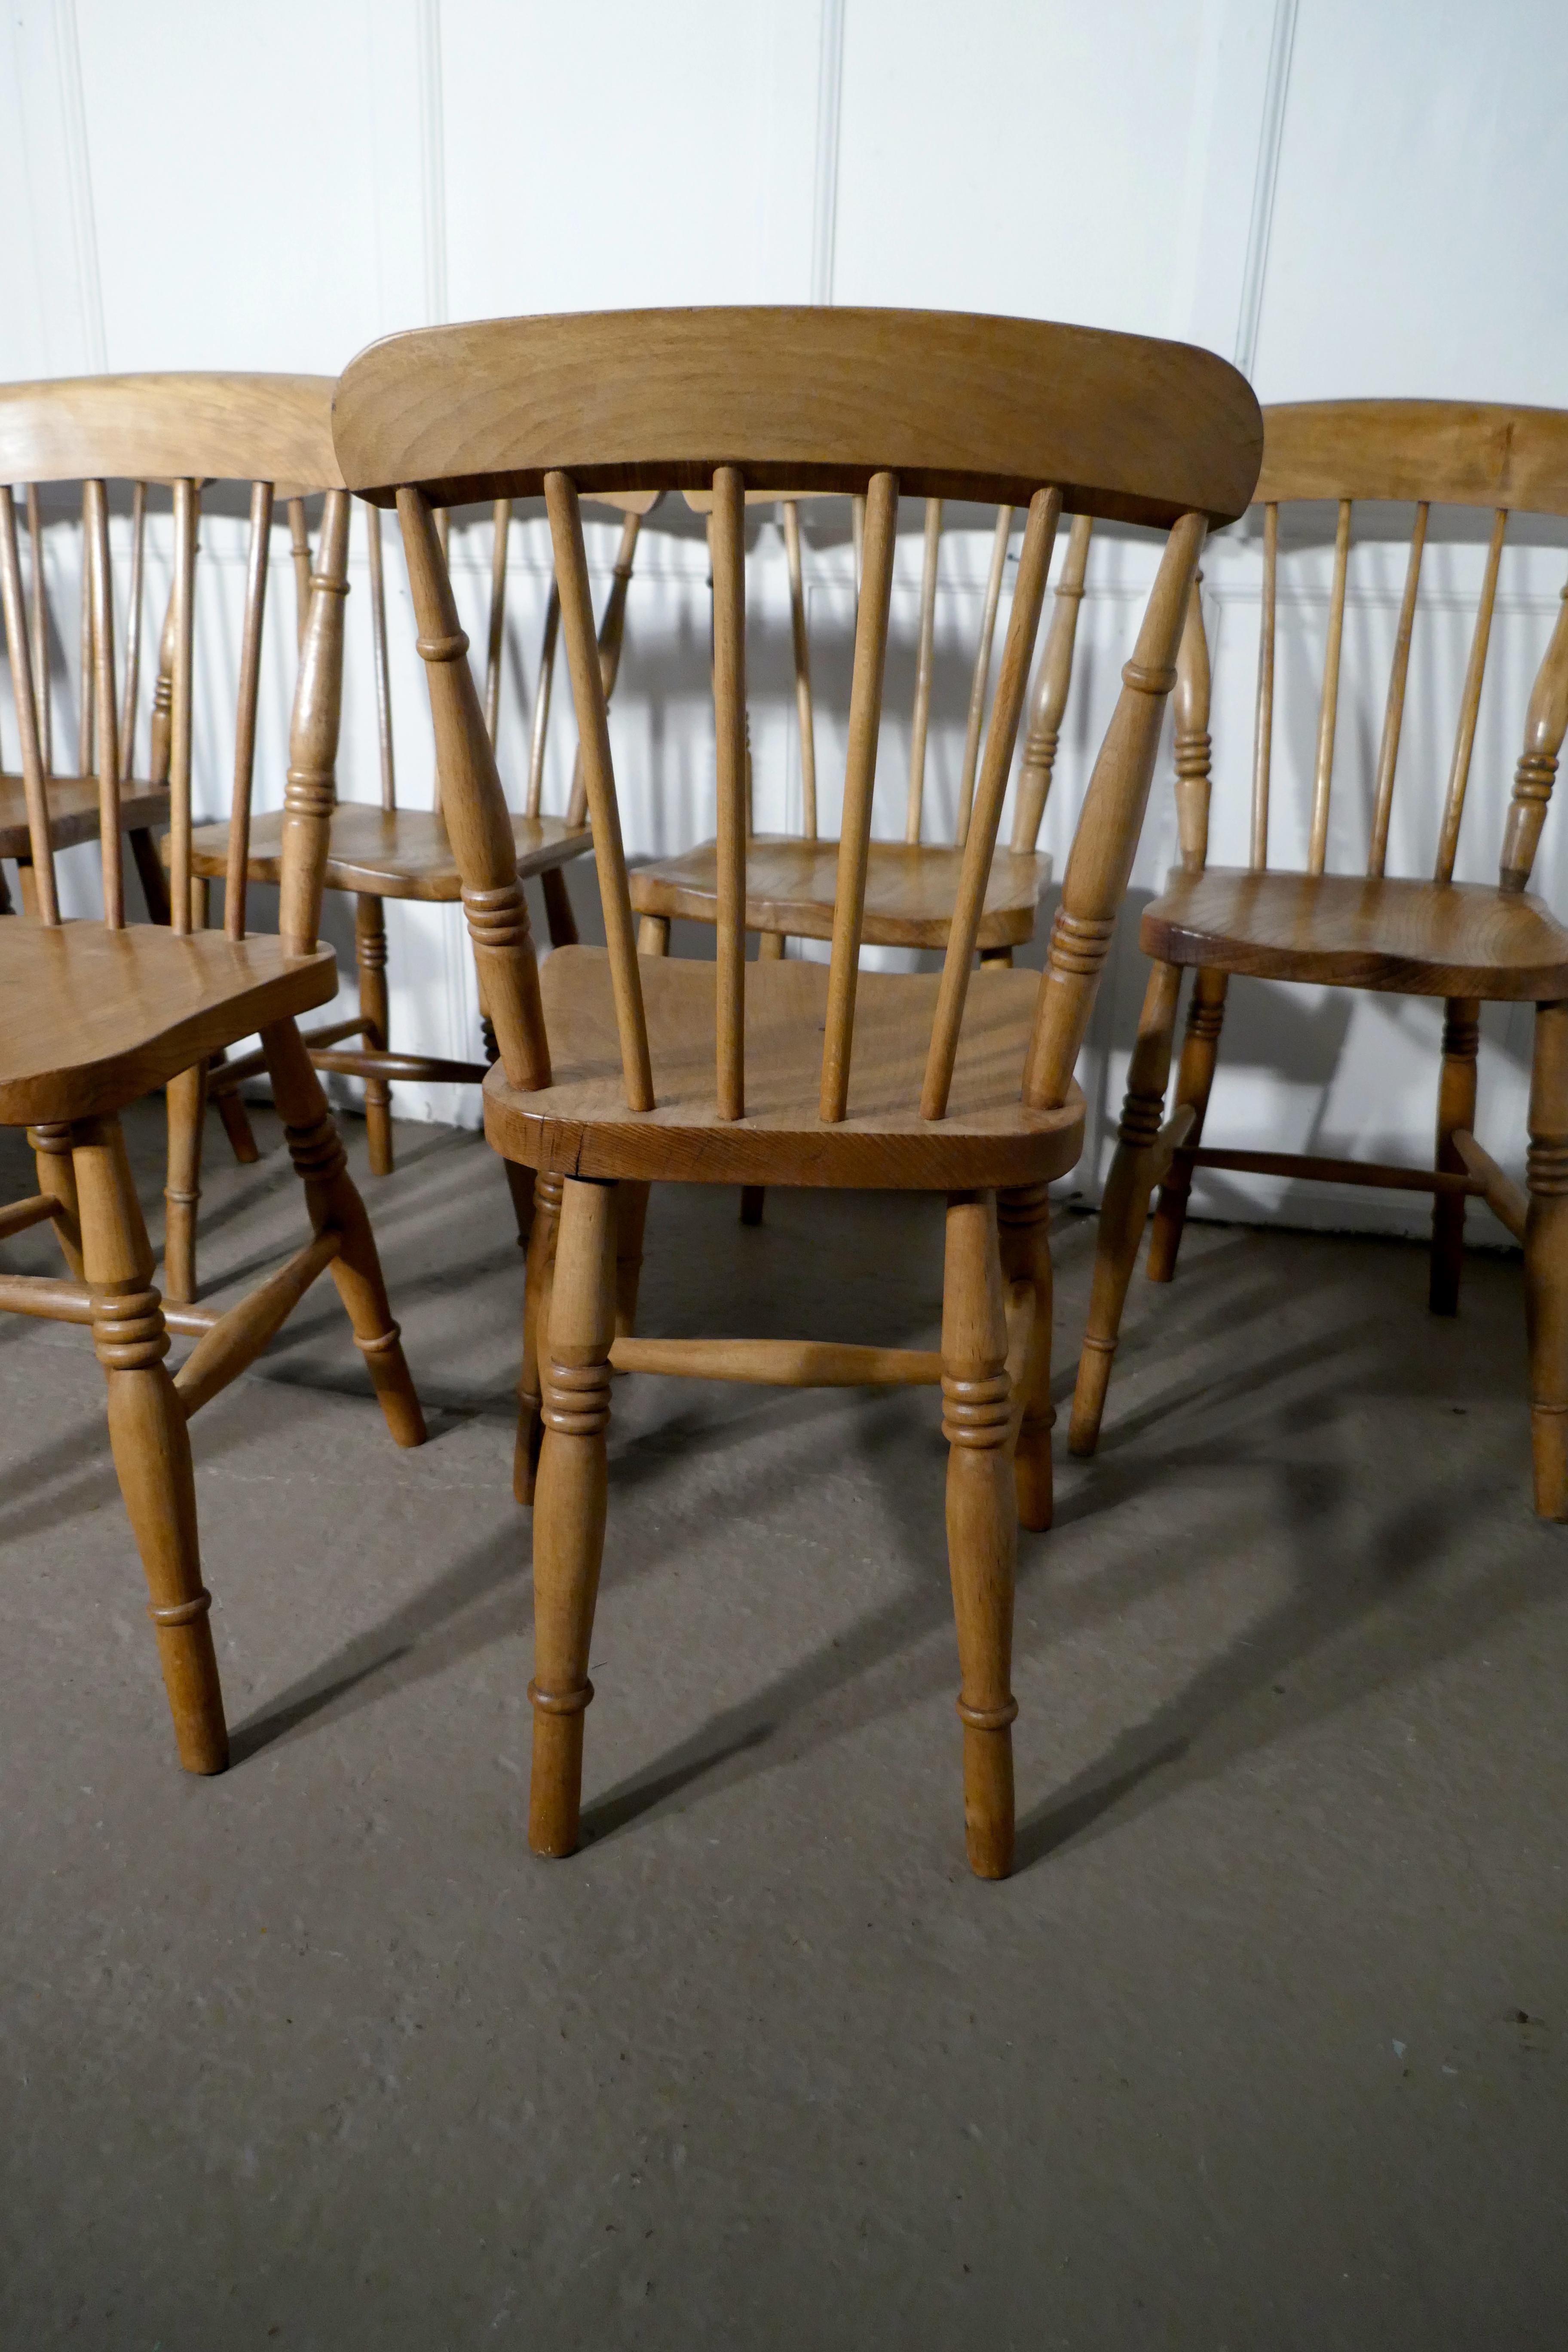 Harlequin set of 8 Victorian beech and elm country kitchen chairs

The chairs date from the late 19th century, they are a classic spindle back design.

This is a good traditional set of chairs, with very slight differences in the turnings and